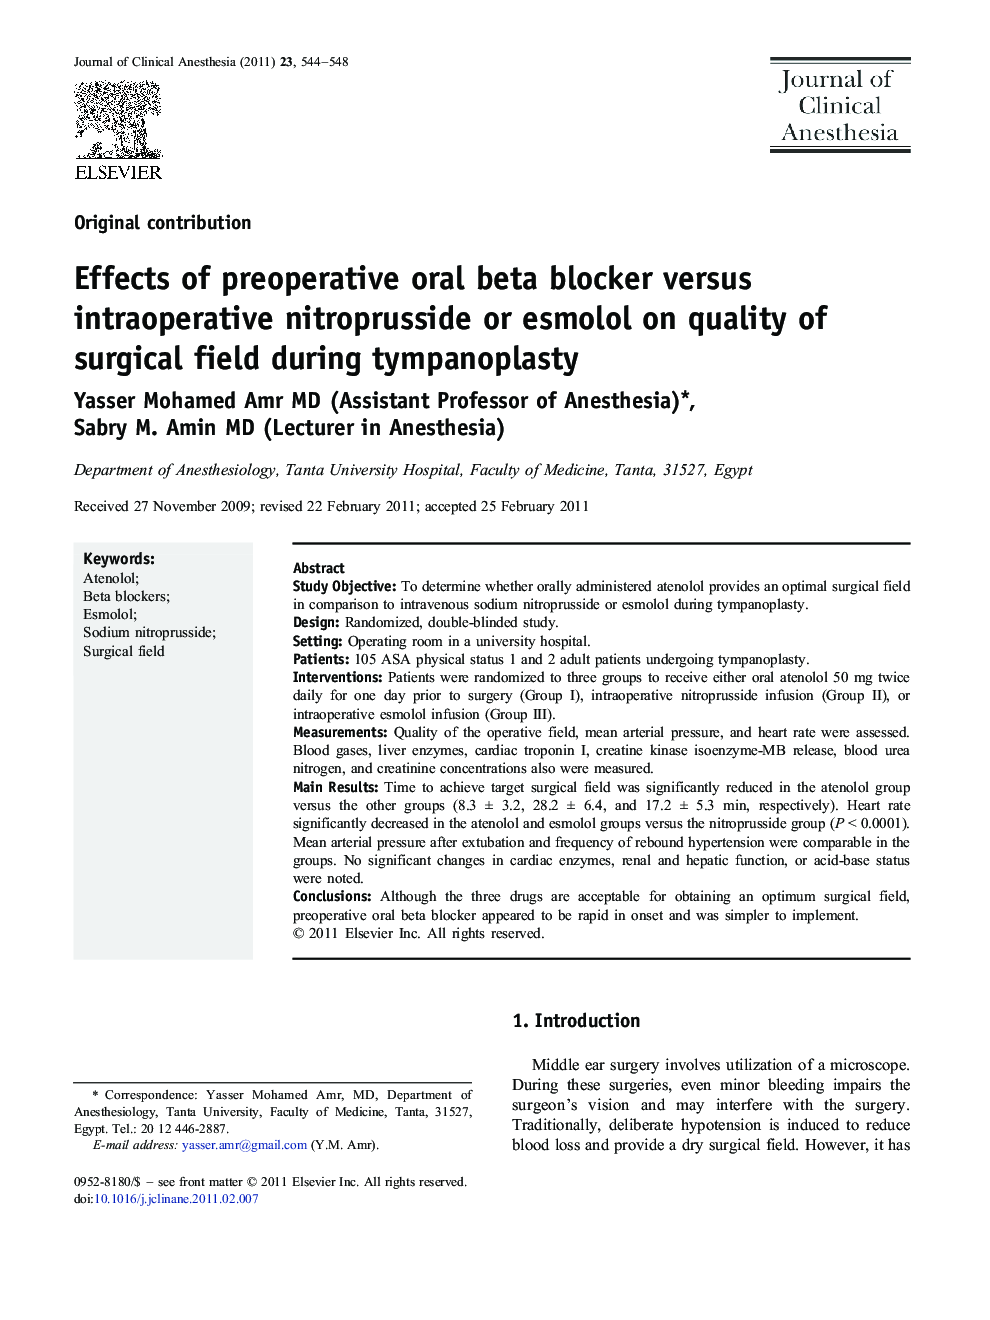 Effects of preoperative oral beta blocker versus intraoperative nitroprusside or esmolol on quality of surgical field during tympanoplasty